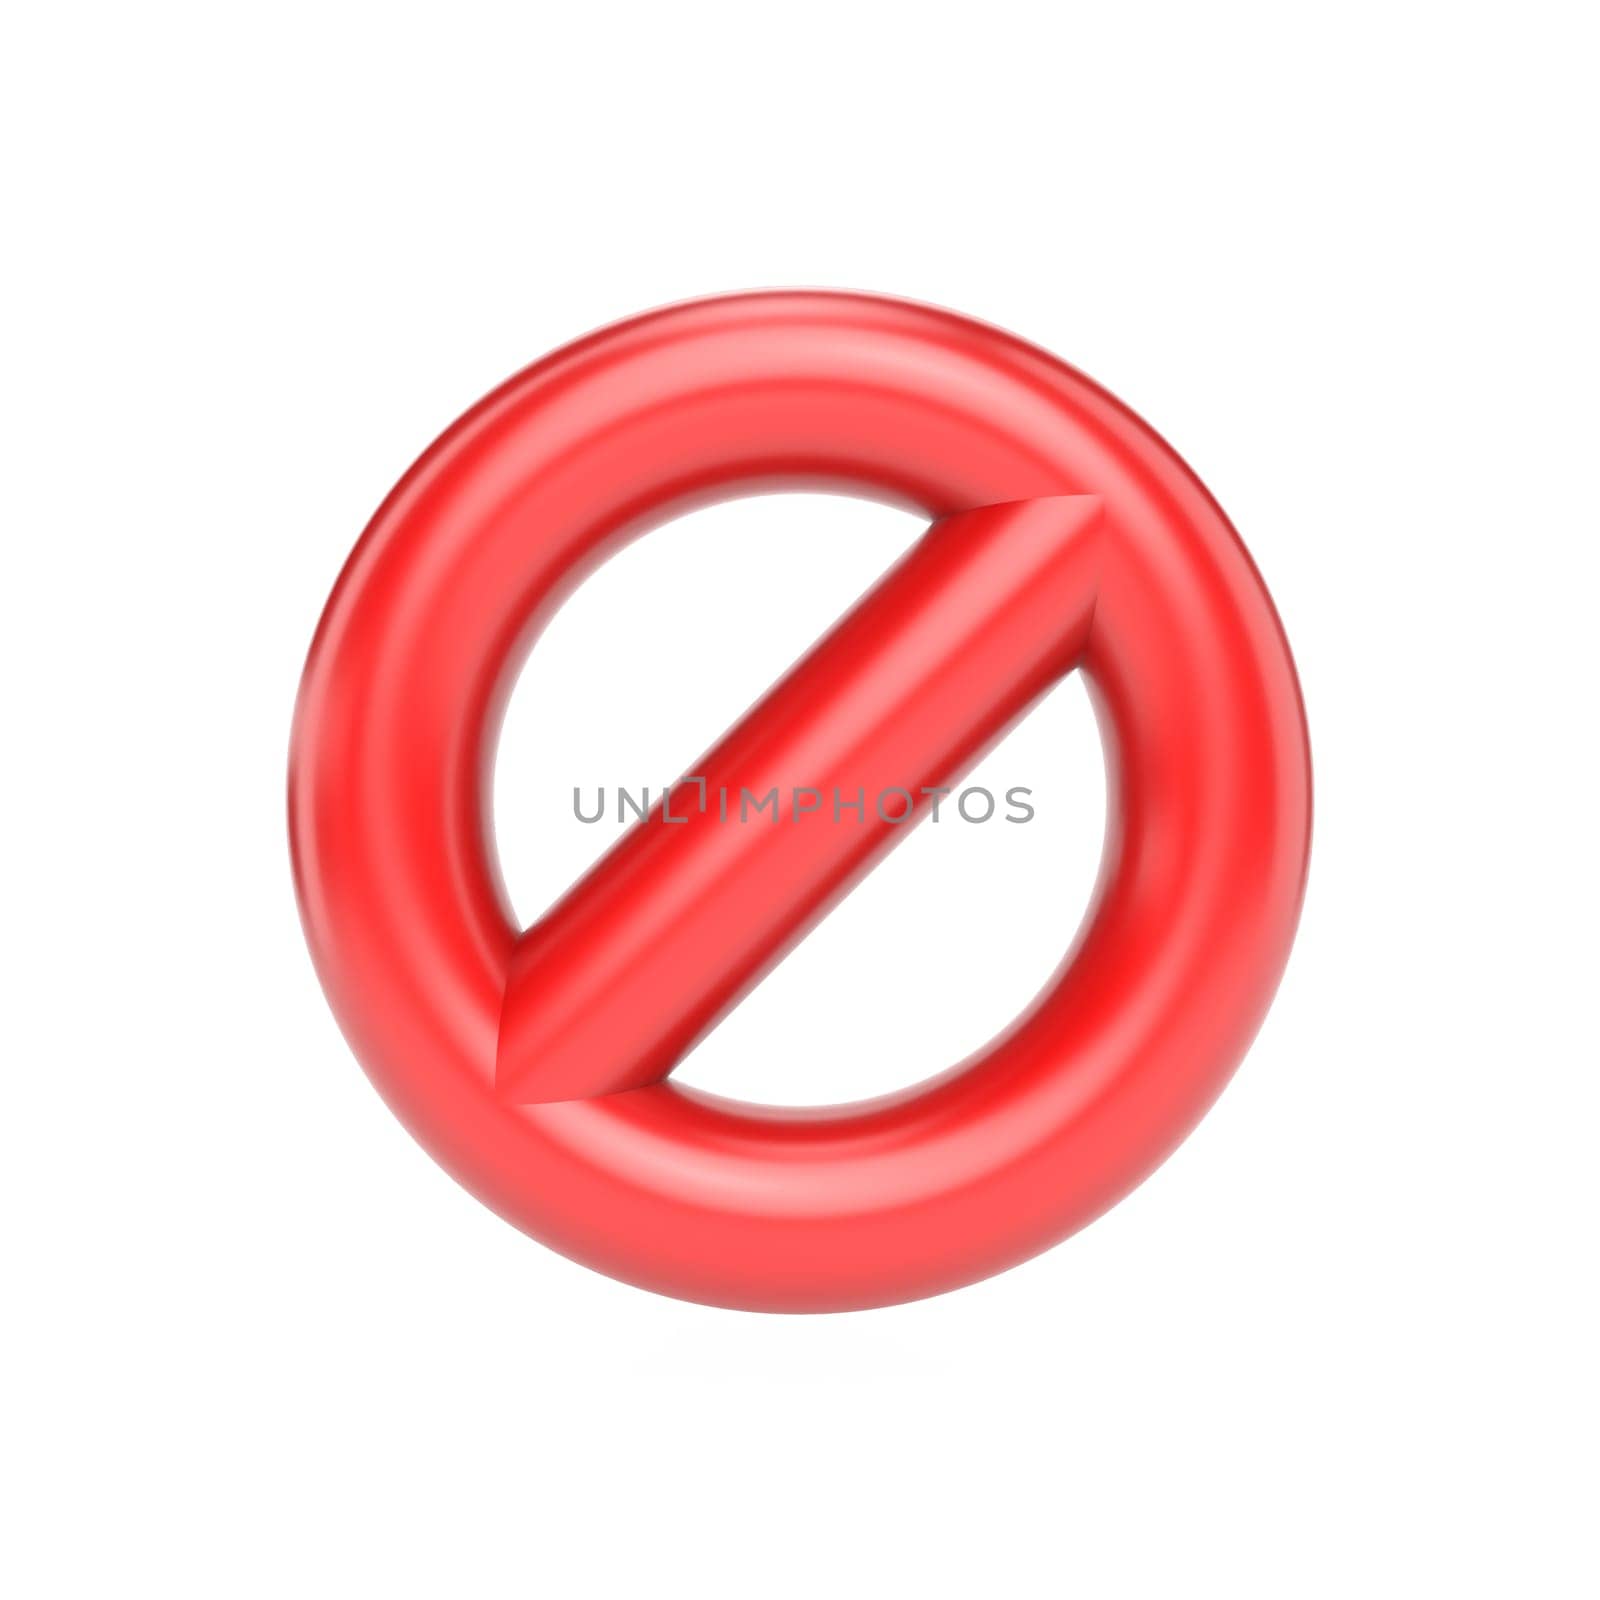 Prohibited sign 3D rendering illustration isolated on white background